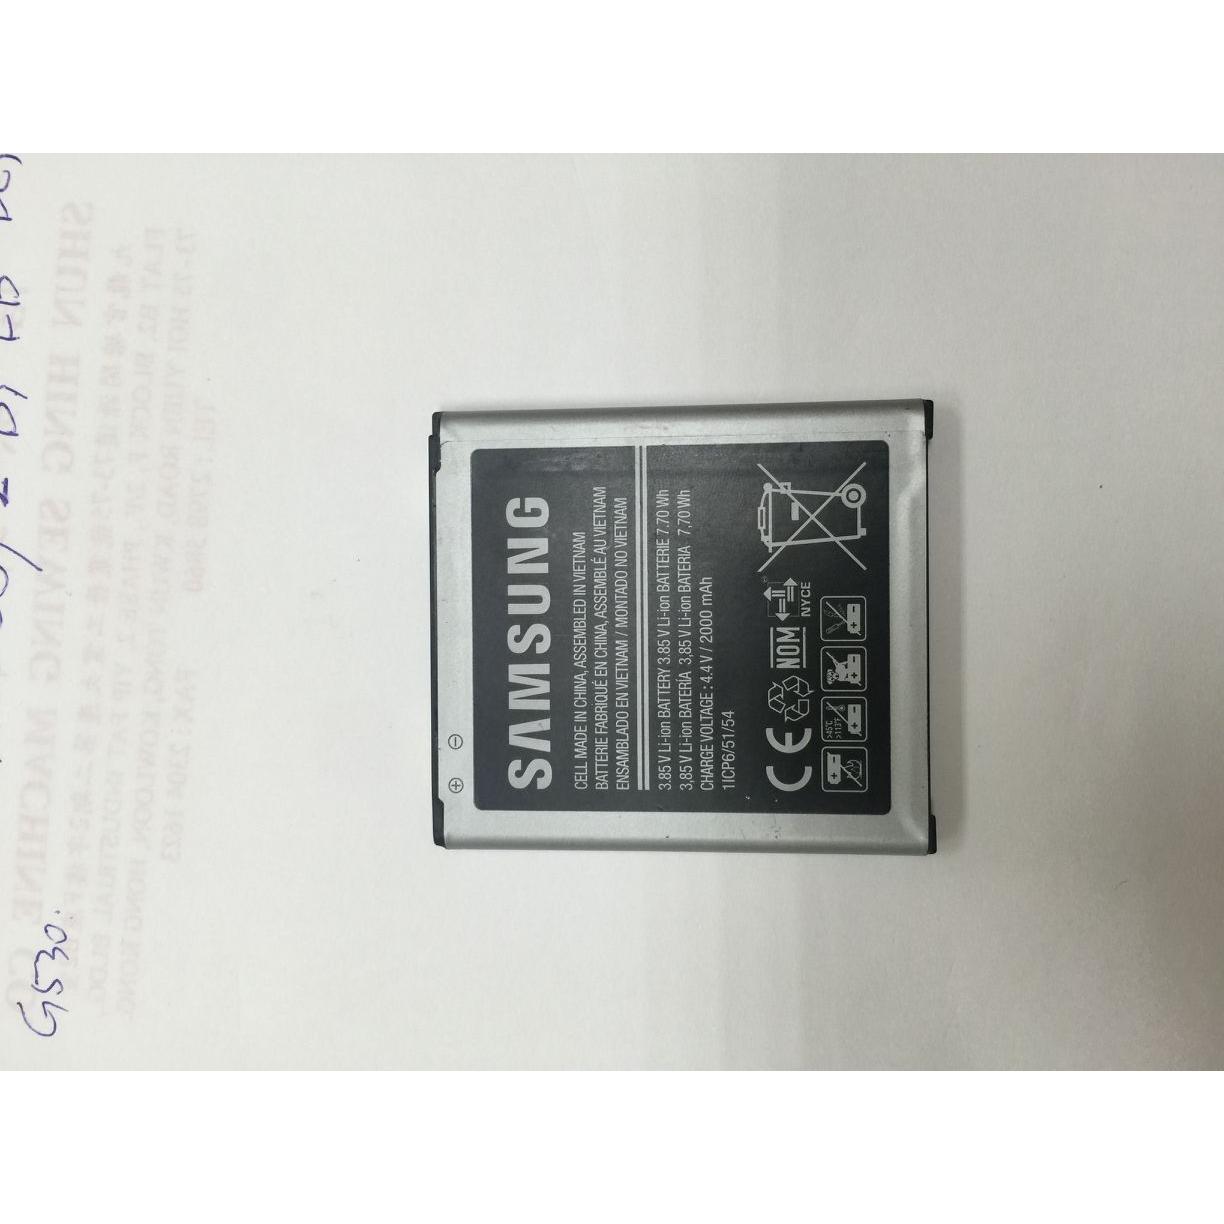 Samsung Galaxy S3 i9300 Battery 2100mAh Wholesale Suppliers